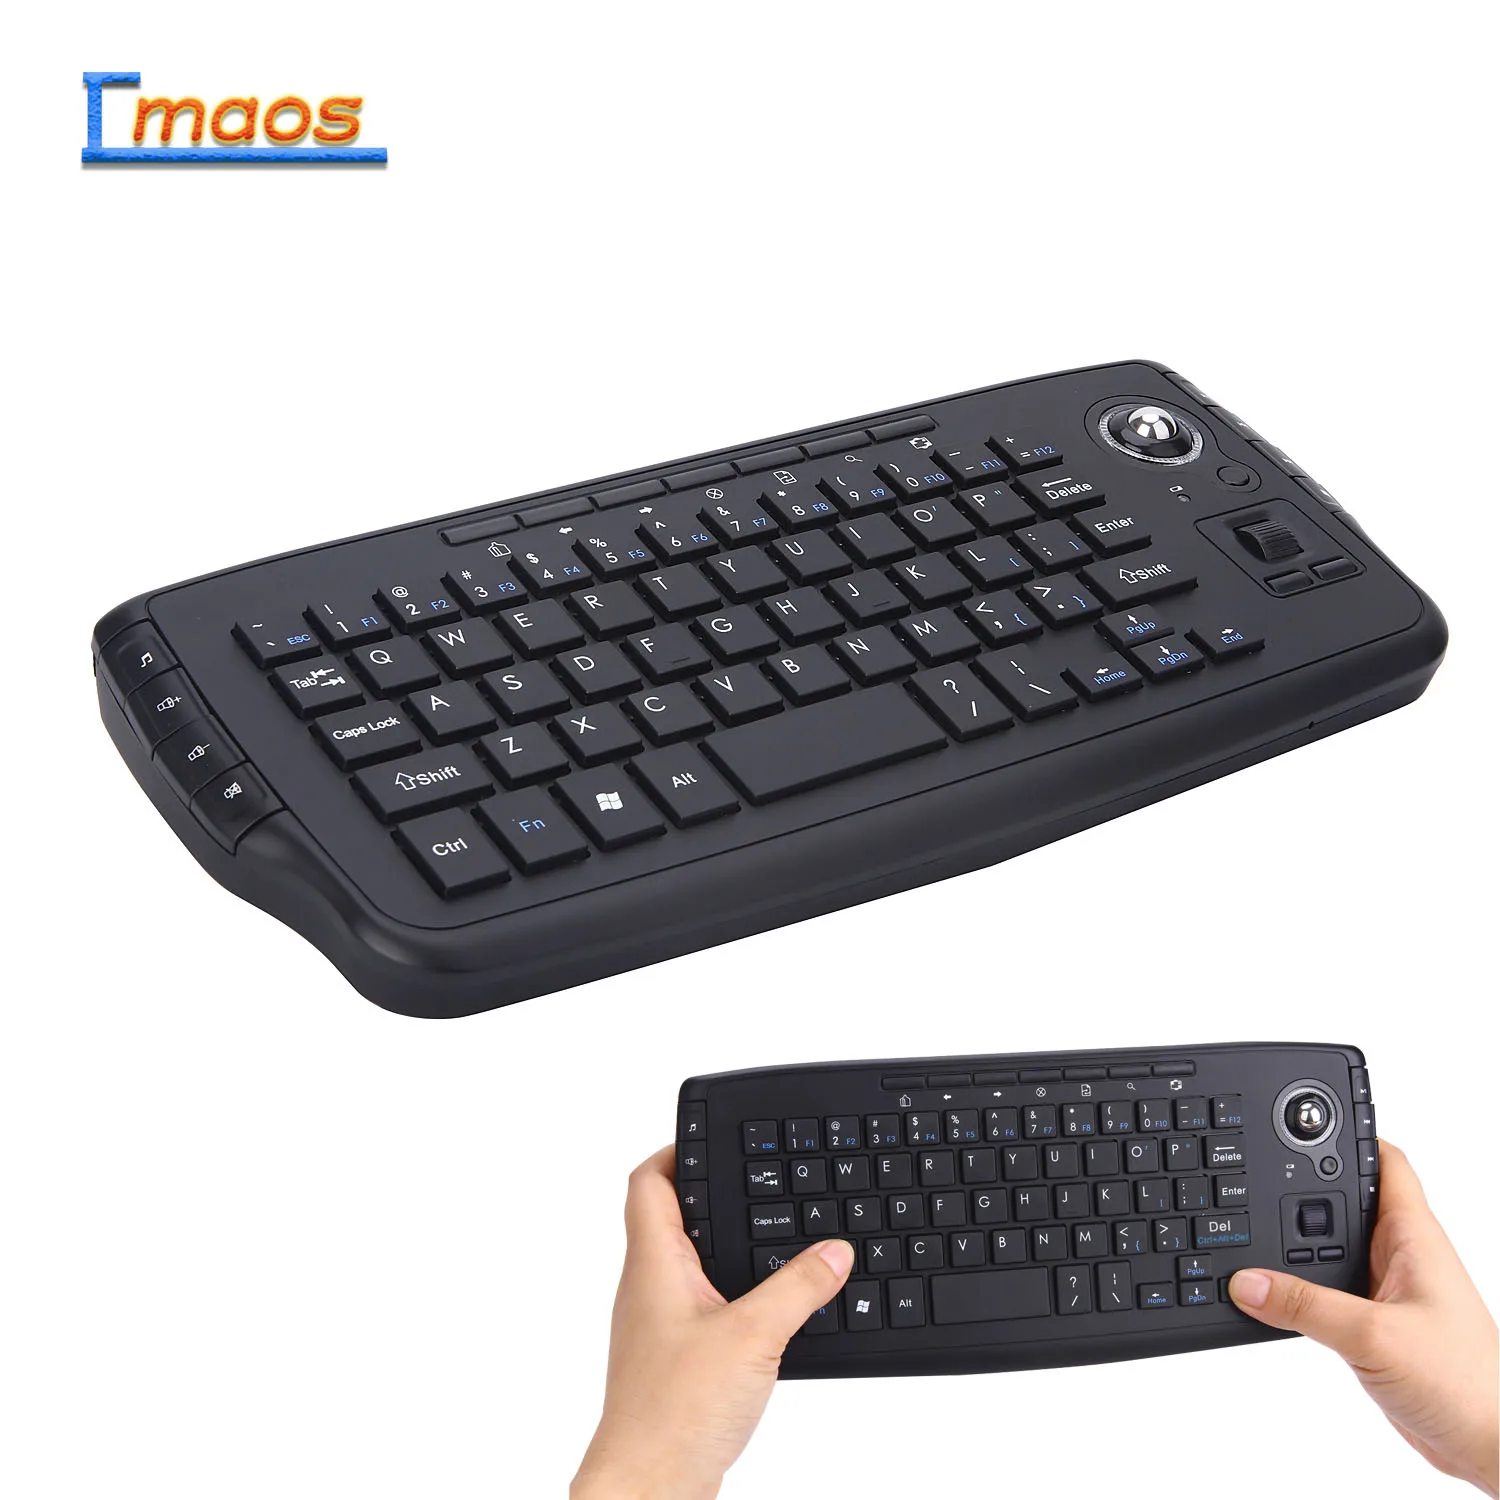 

Mini Hand Held WIRELESS KEYBOARD Portable Multi-function Gaming Keyboard Trackball Air Mouse For PC Laptop